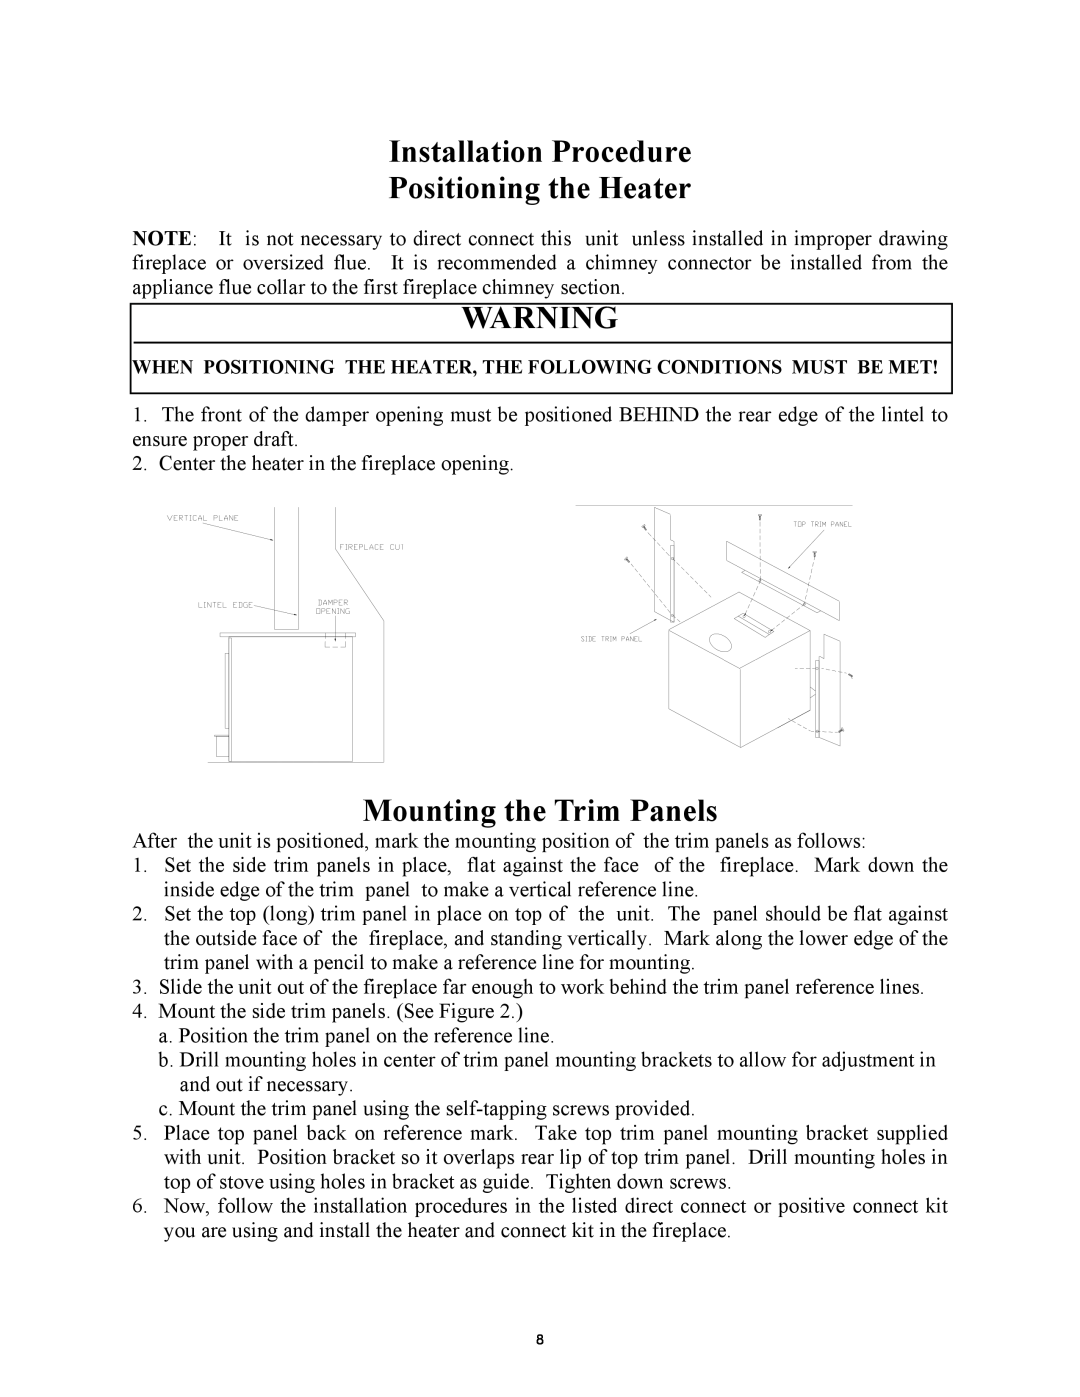 New Buck Corporation 85 installation instructions Installation Procedure Positioning the Heater, Mounting the Trim Panels 